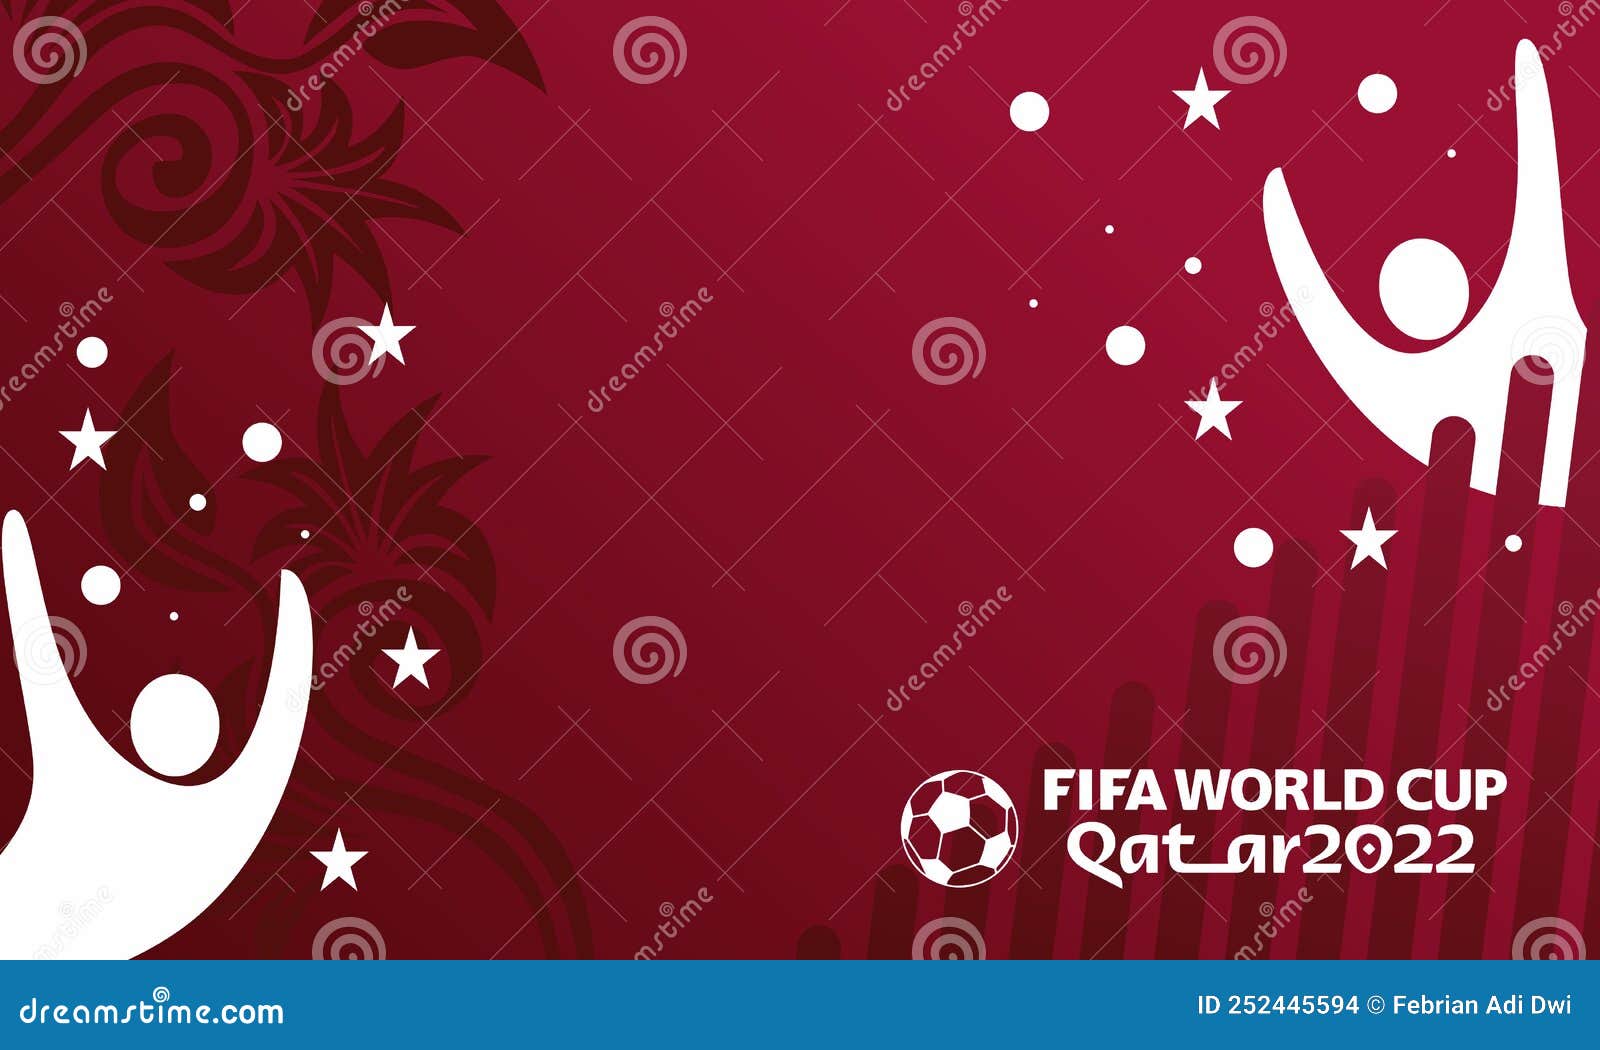 Background Design Football Tournament, Football Cup, Template, Vector  Illustration, World Cup Qatar 2022 Stock Vector - Illustration of background,  game: 252445594